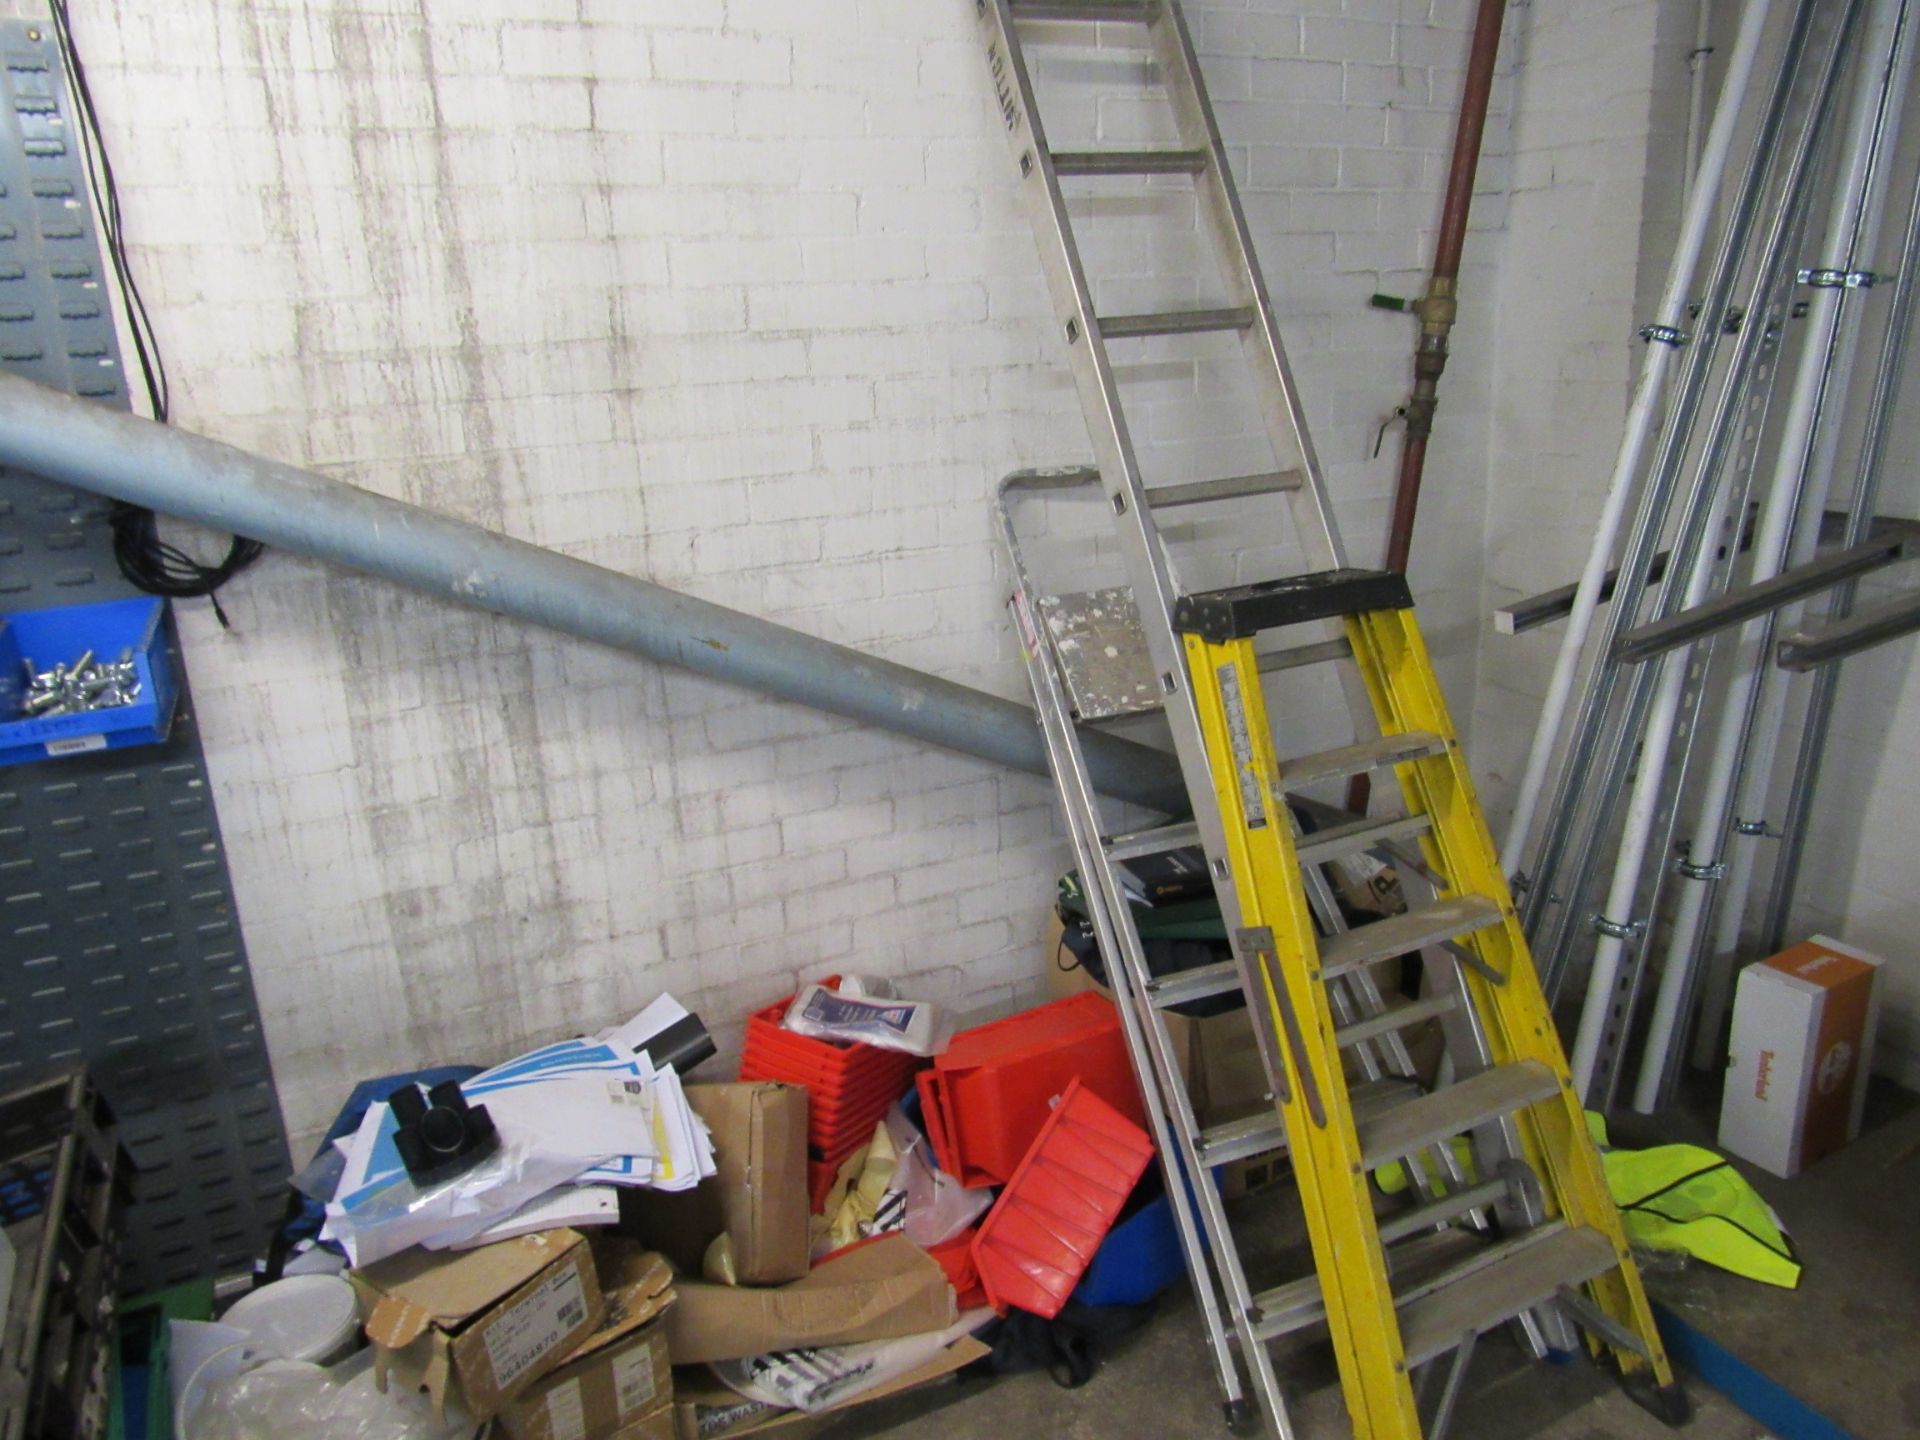 2 various ladders and quantity of plastic storage bins (excludes yellow ladders)